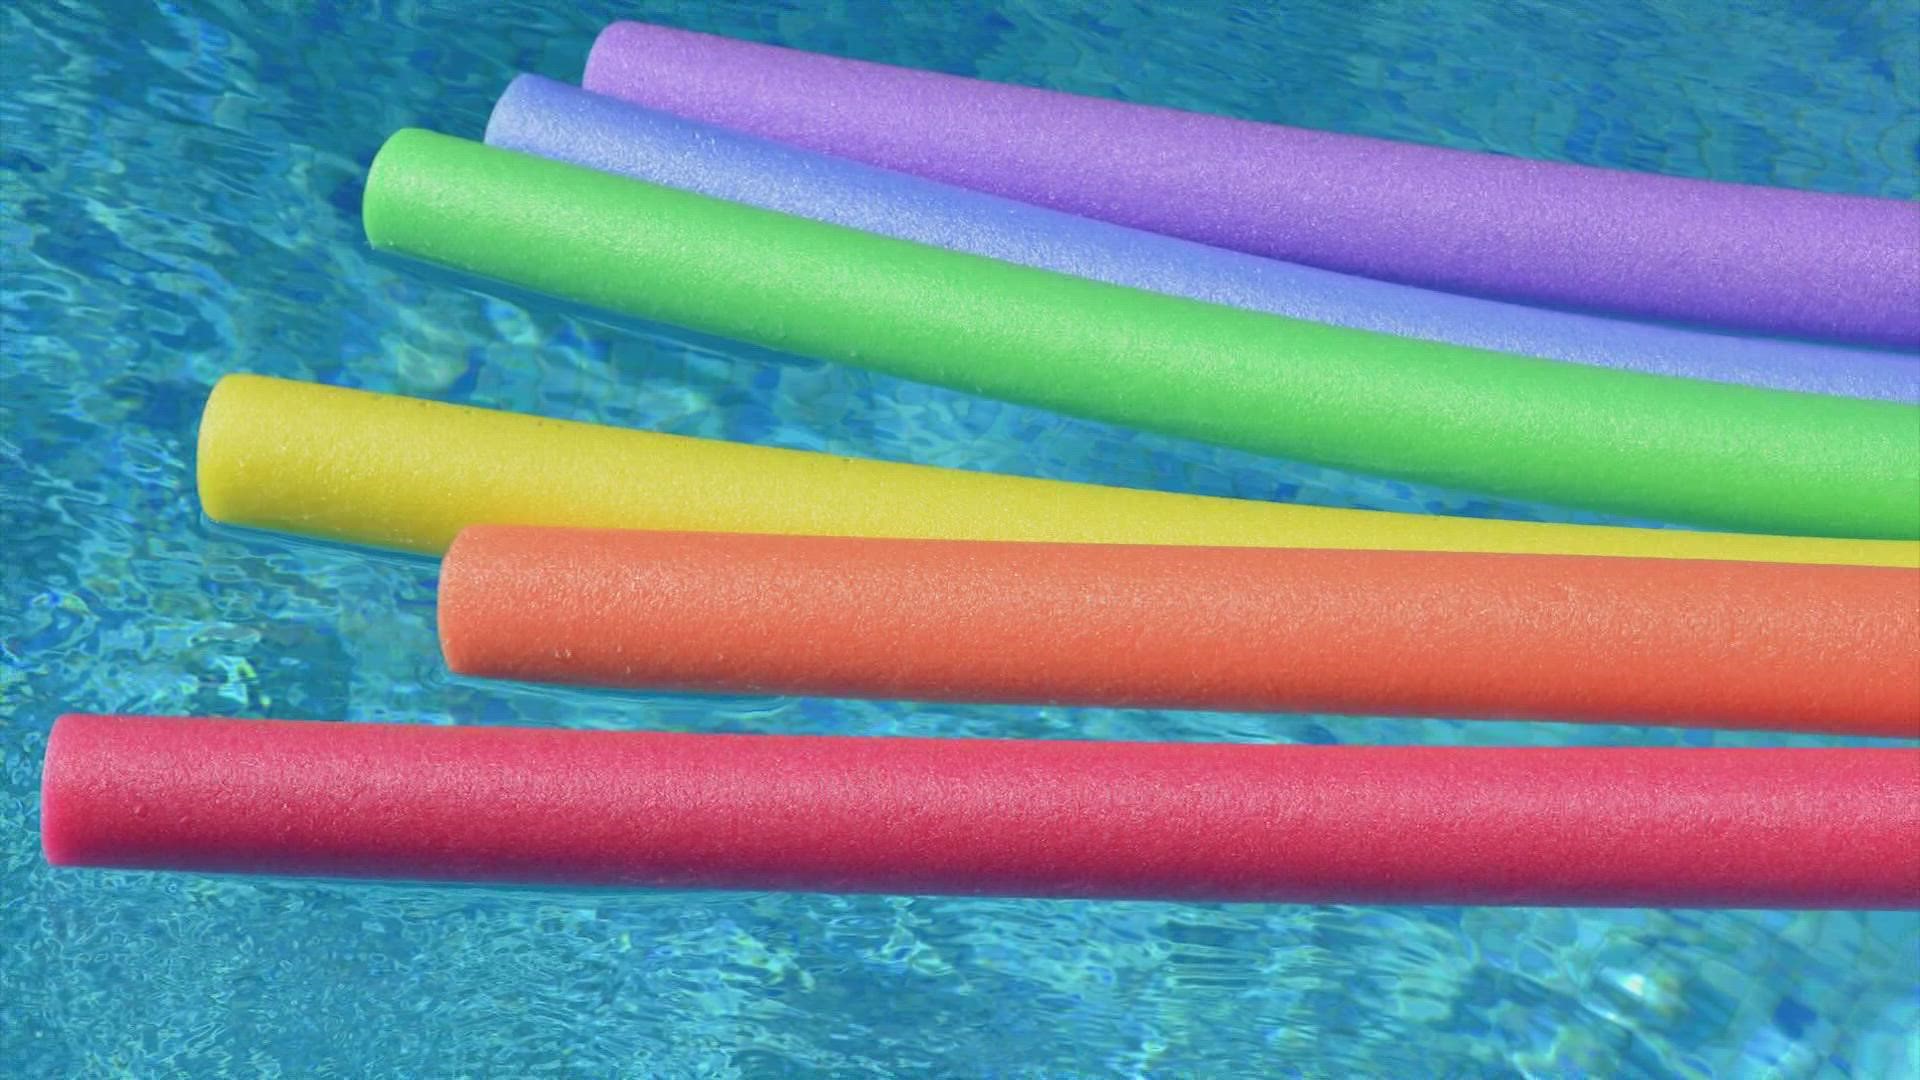 If stores are running out of the supplies you need to protect your homes, there are other things you can pick up that would get the job done, like pool noodles.